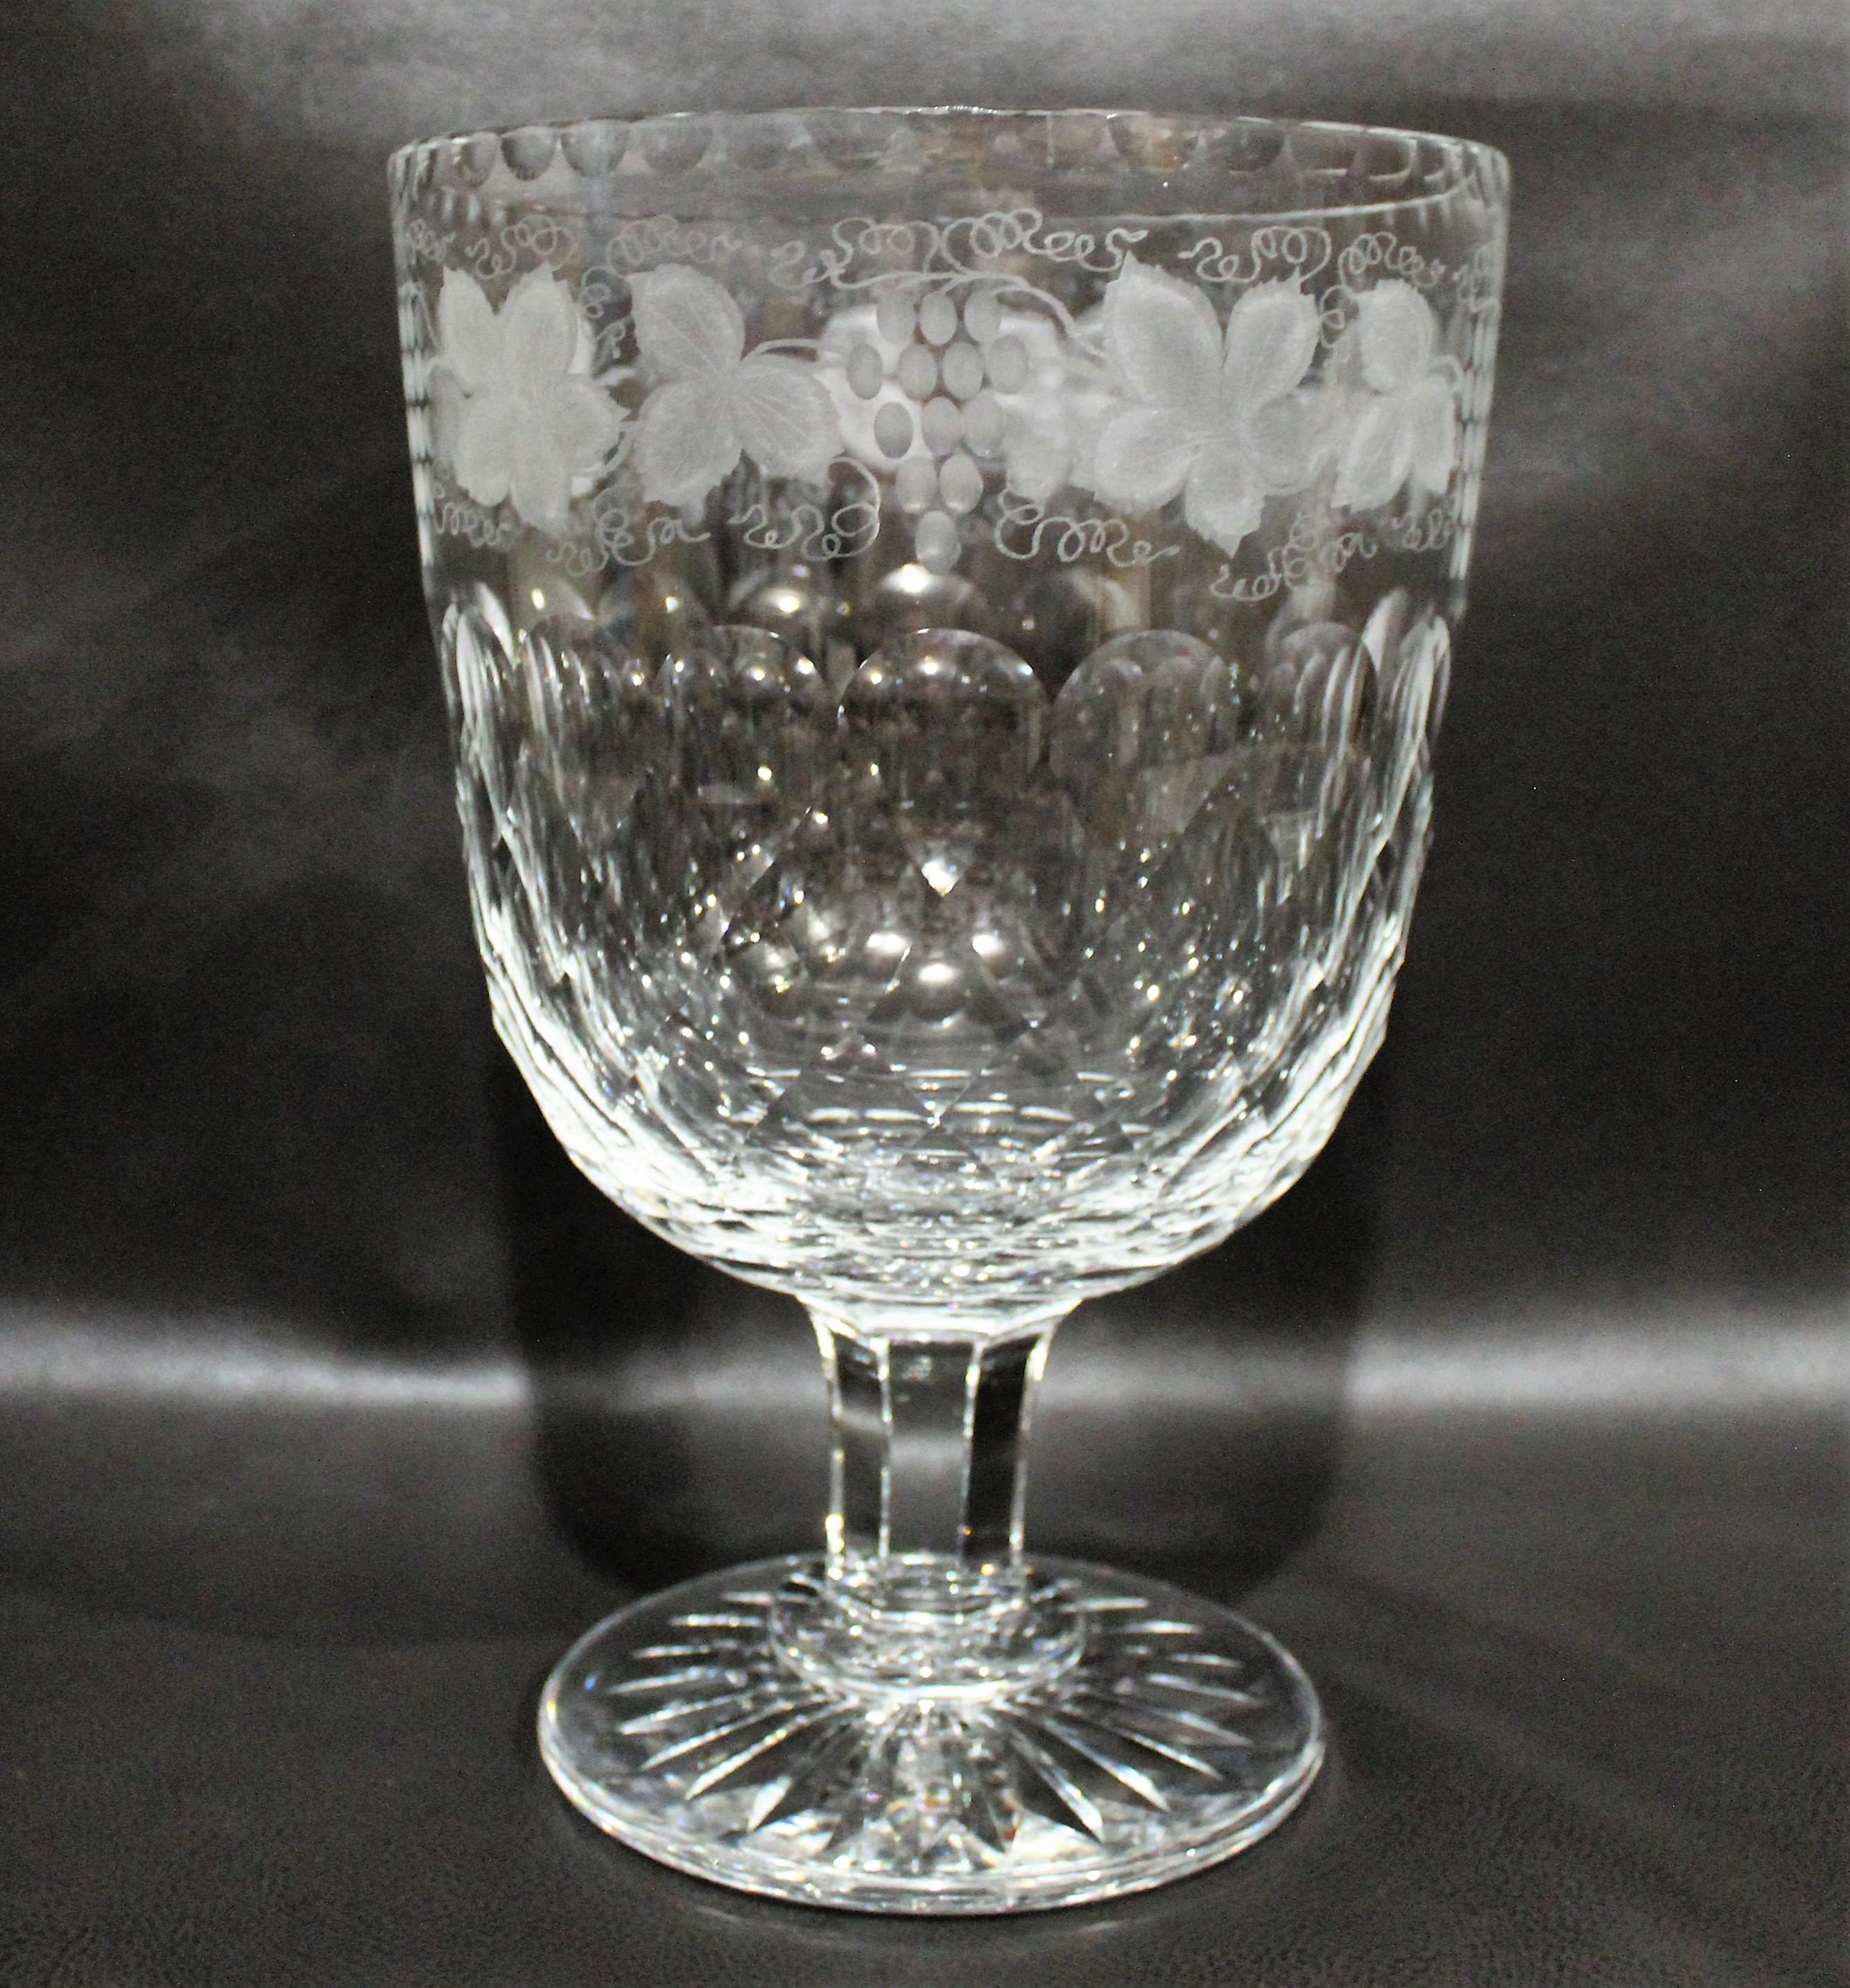 Large size presentation piece crystal goblet or centerpiece by Thomas Webb & Sons for Tiffany & Co. features acid etched foliate and grape designs.